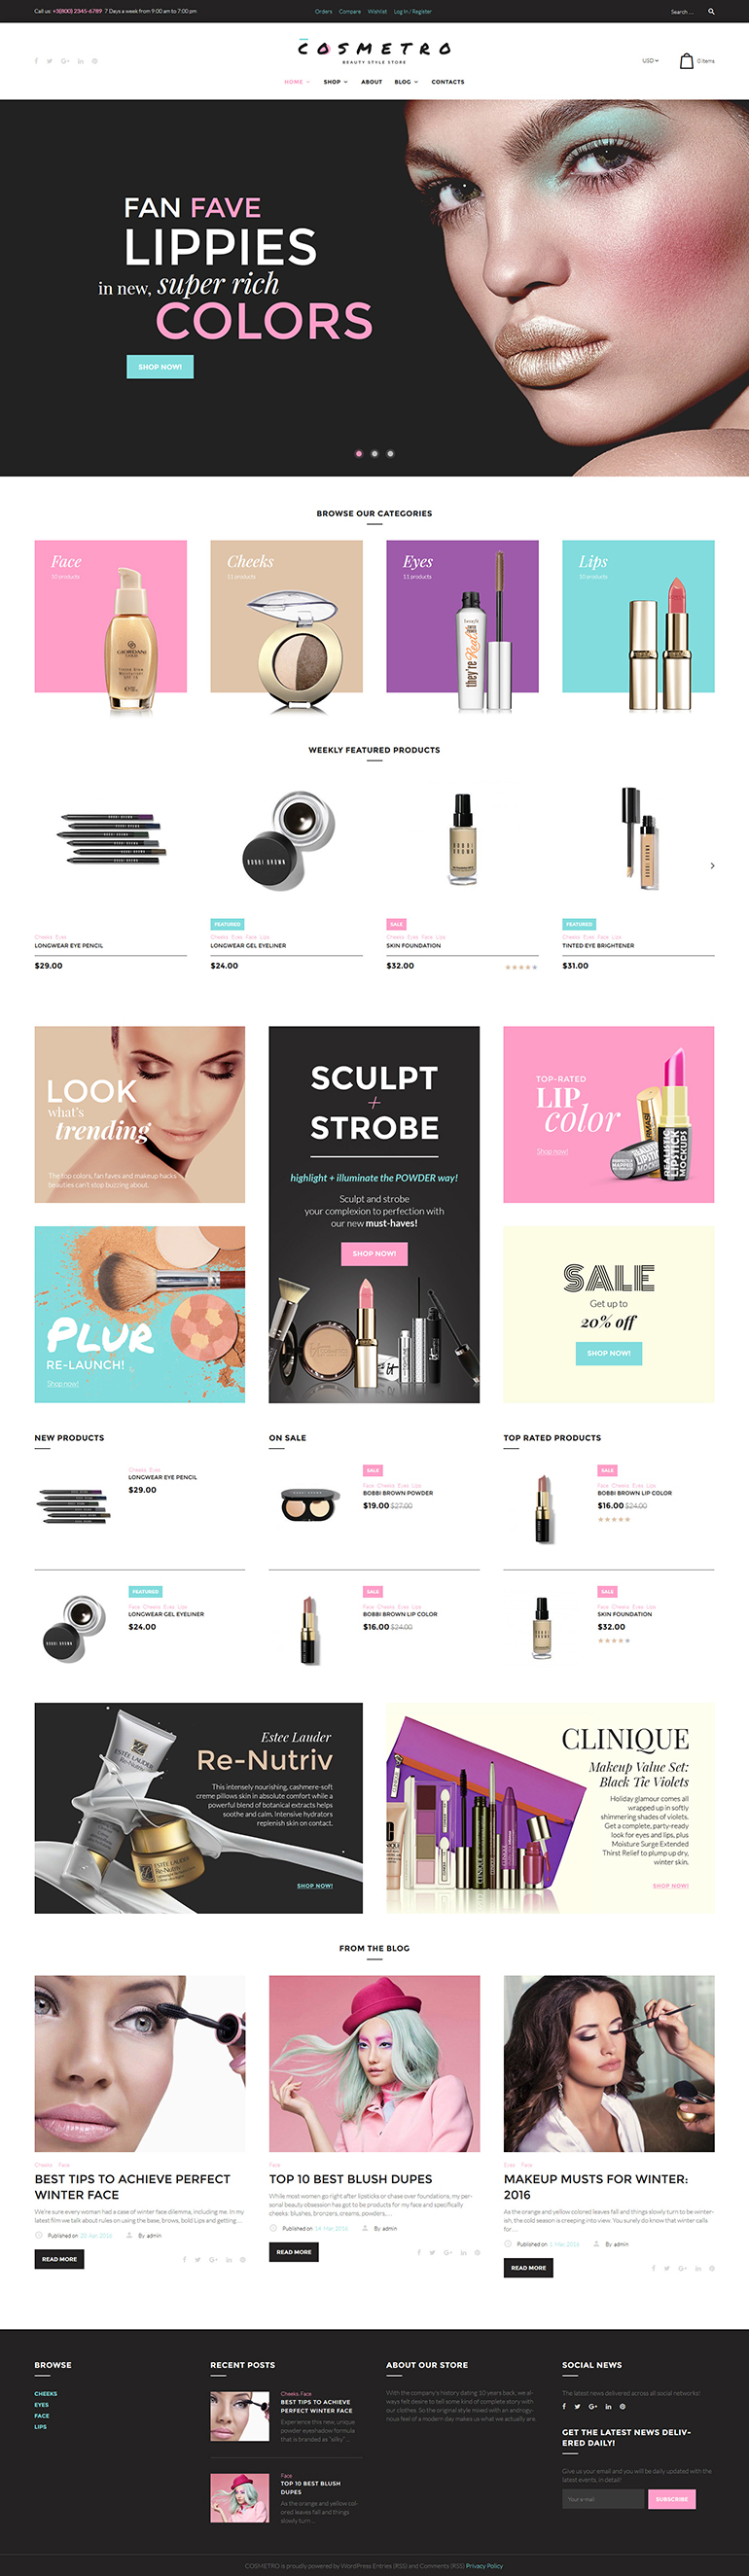 15+ Best WordPress Themes For Your eCommerce Website 14